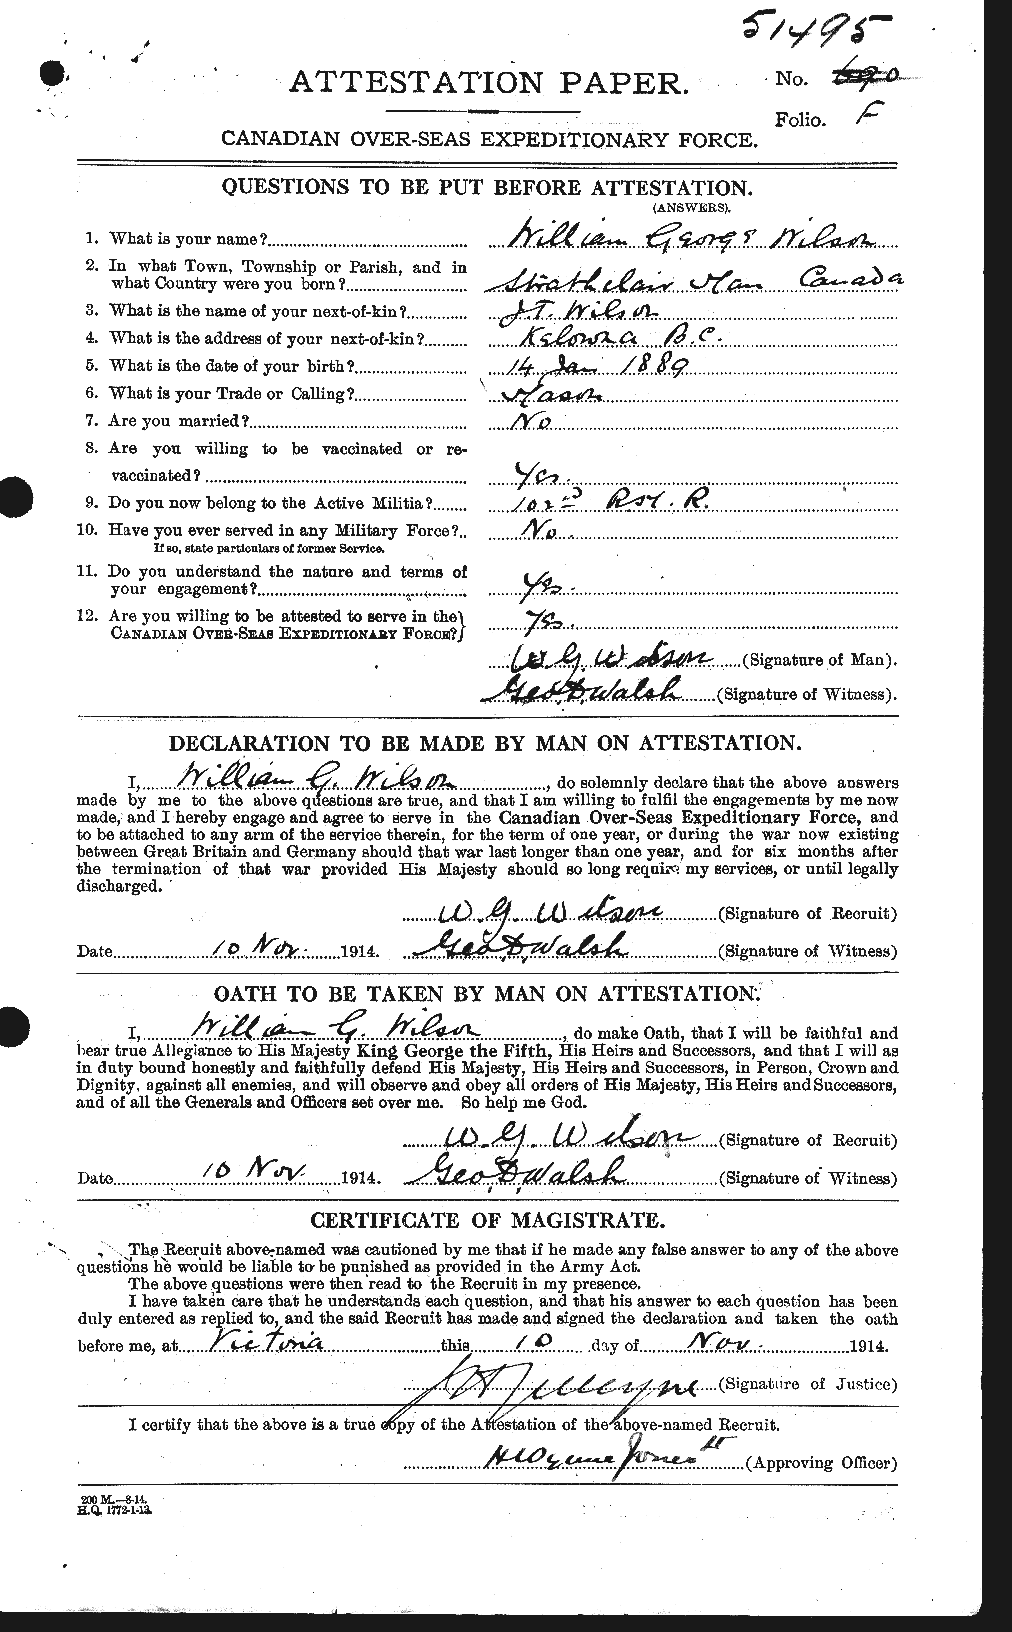 Personnel Records of the First World War - CEF 682004a